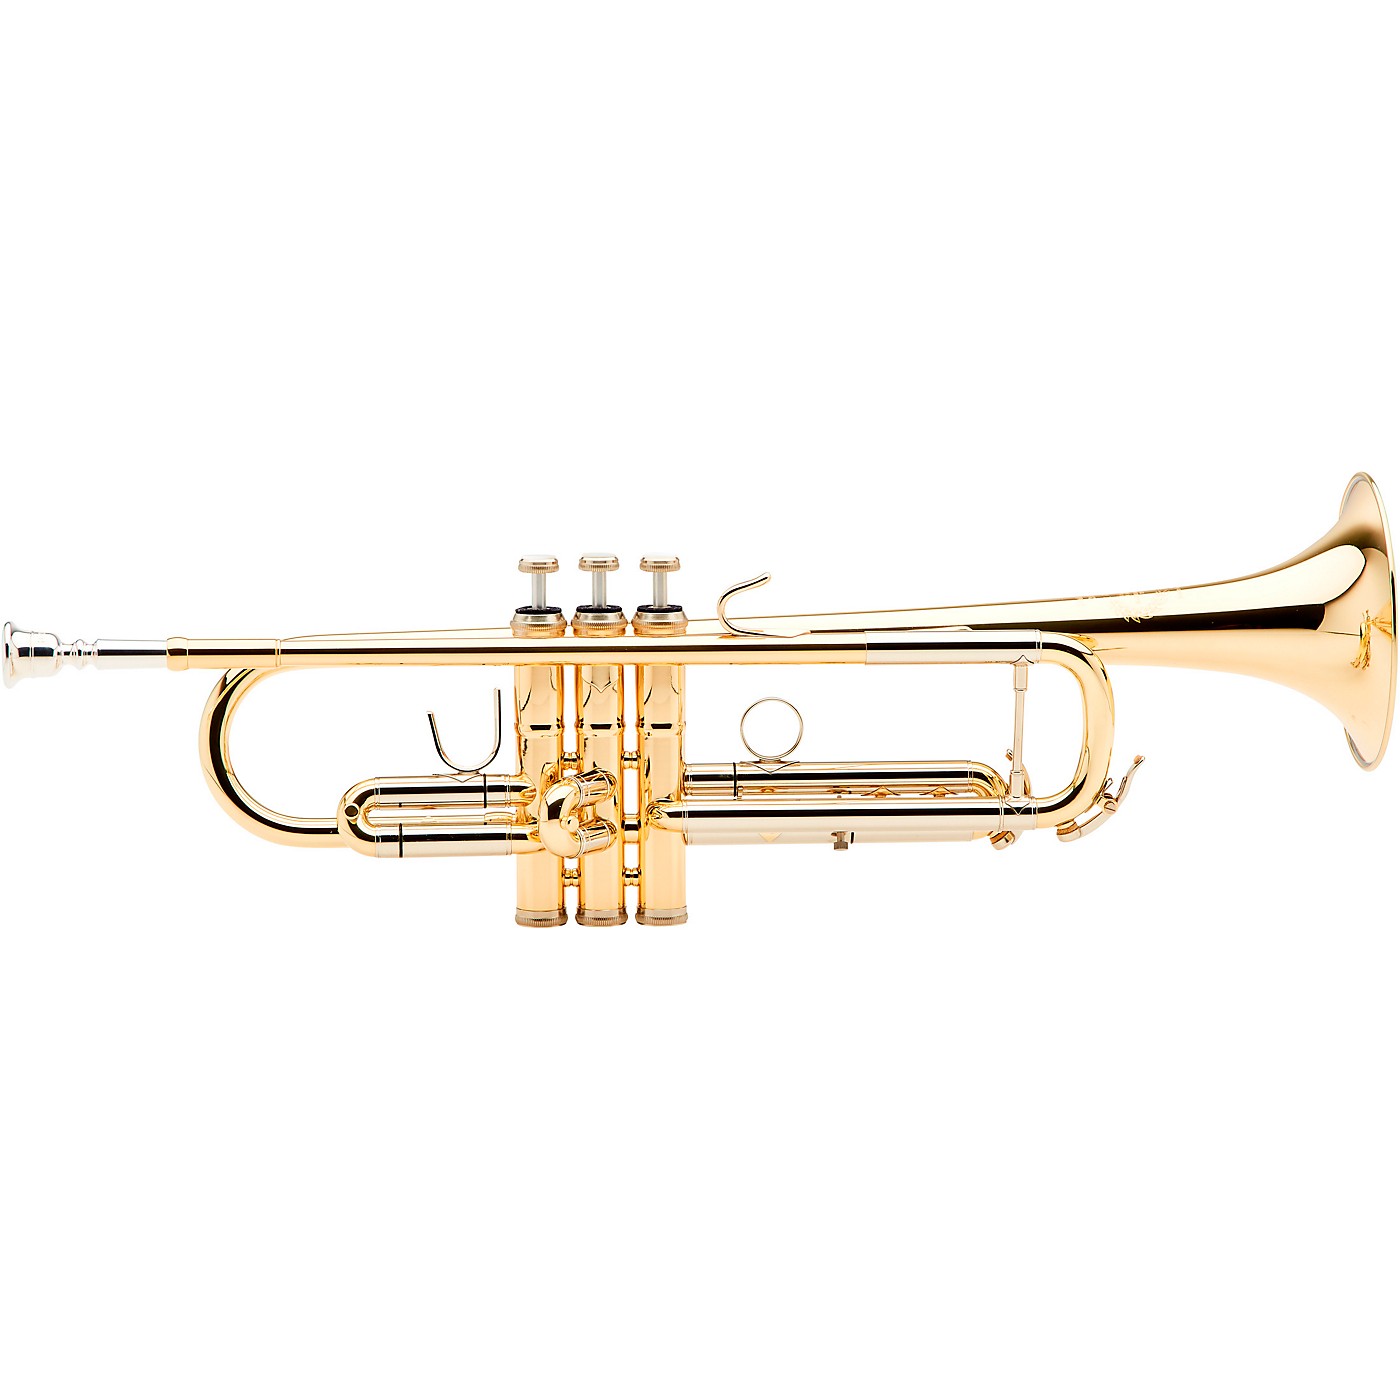 B&S 3143 Challenger II Series Bb Trumpet with Reverse Leadpipe thumbnail